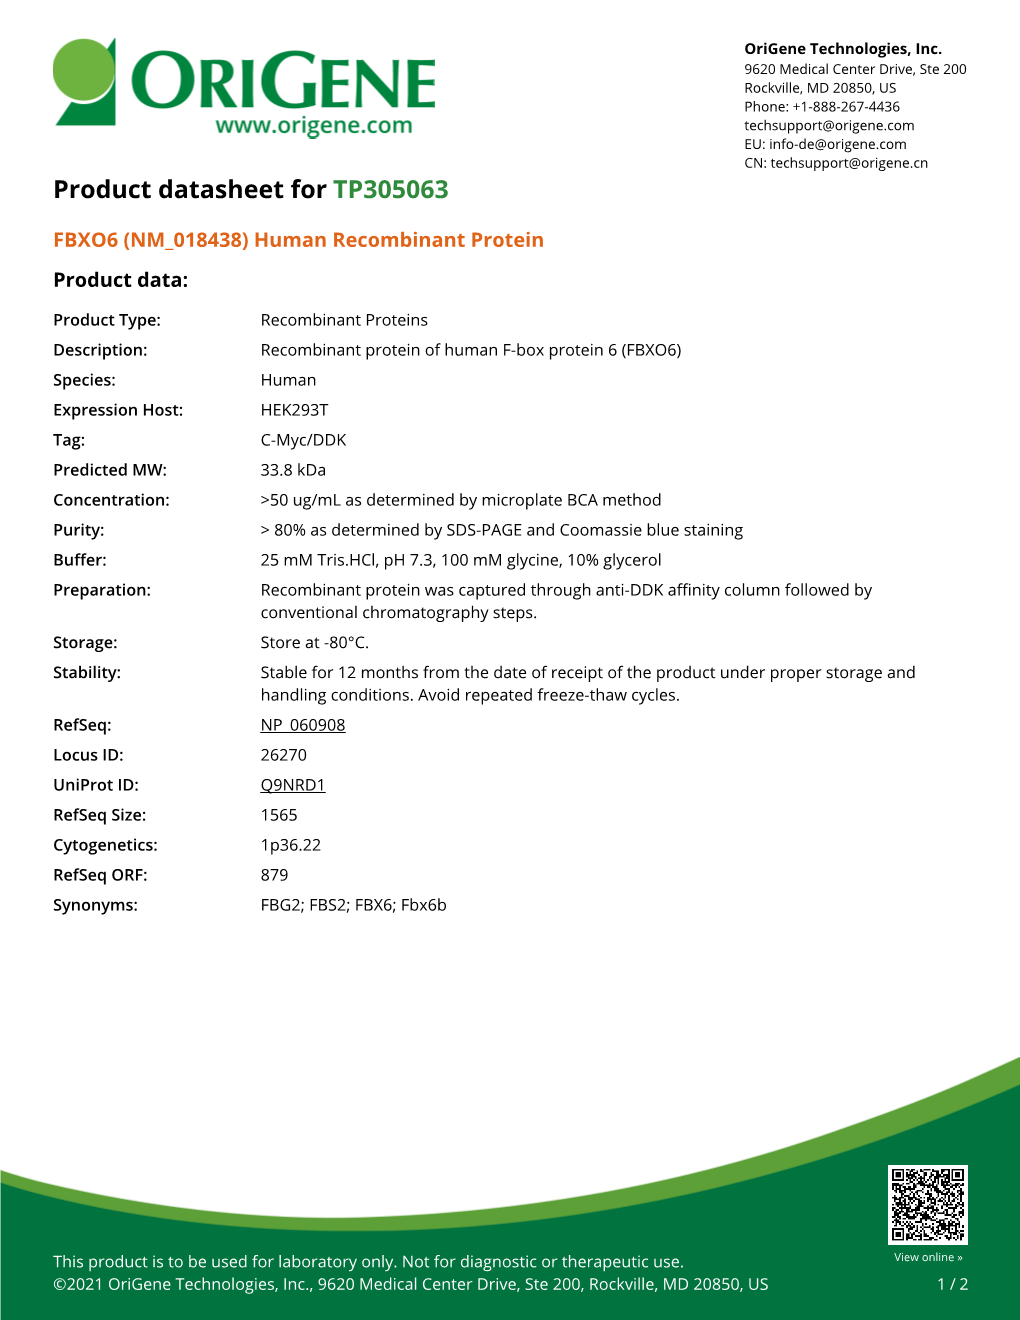 FBXO6 (NM 018438) Human Recombinant Protein Product Data